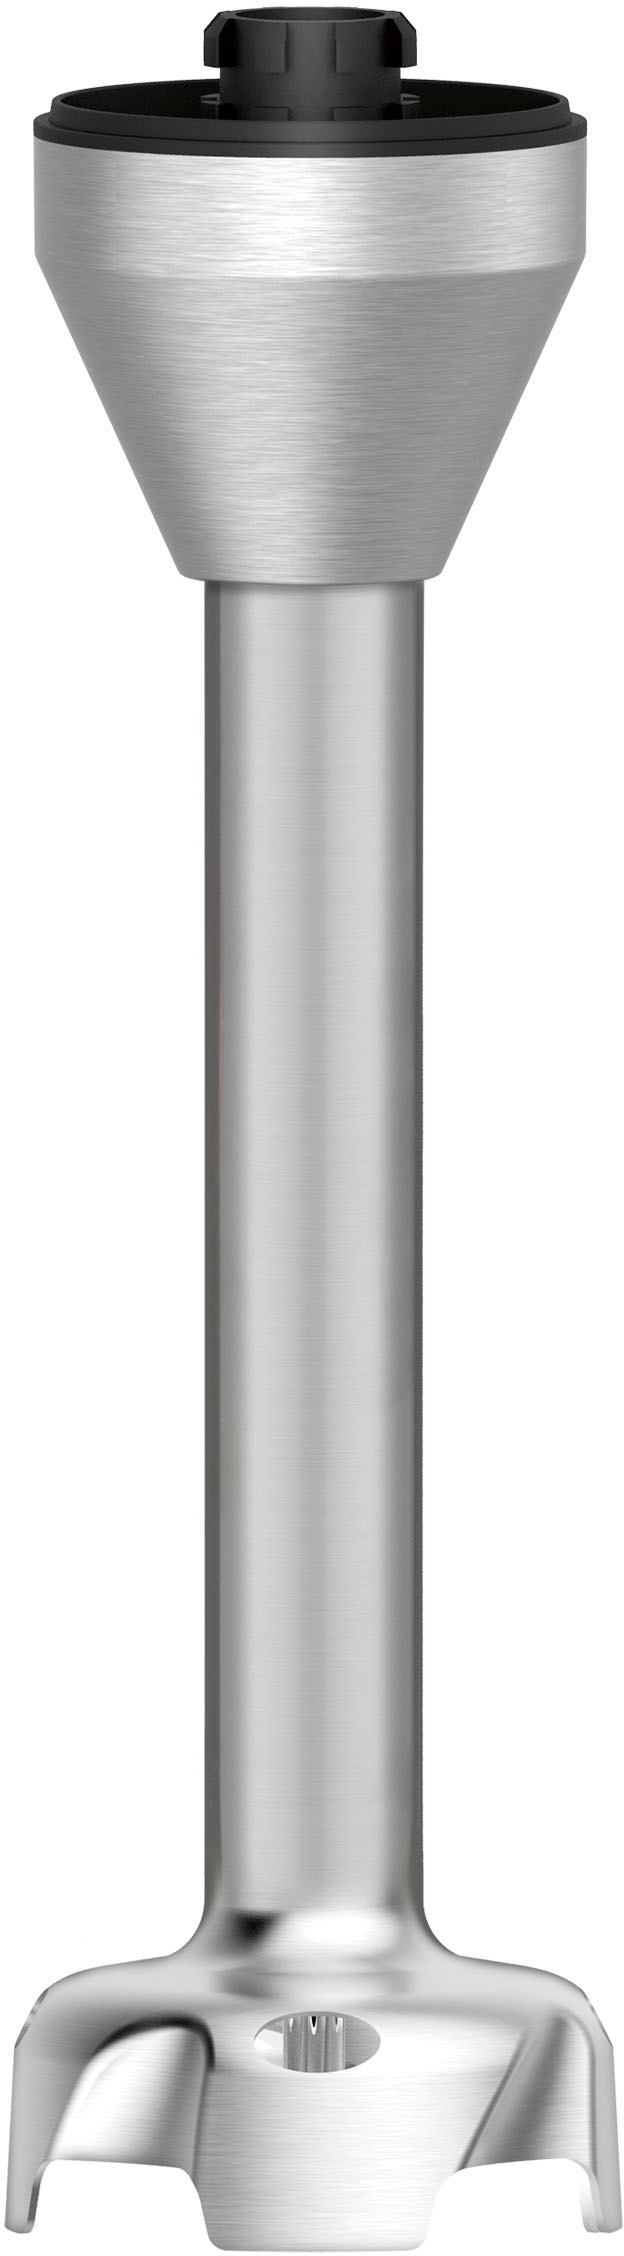 Cuisinart CSB-175SV Smart Stick Two-Speed Hand Blender, Silver Bundle with  Cuisinart Mini-Prep Processor (Brushed Metal) 